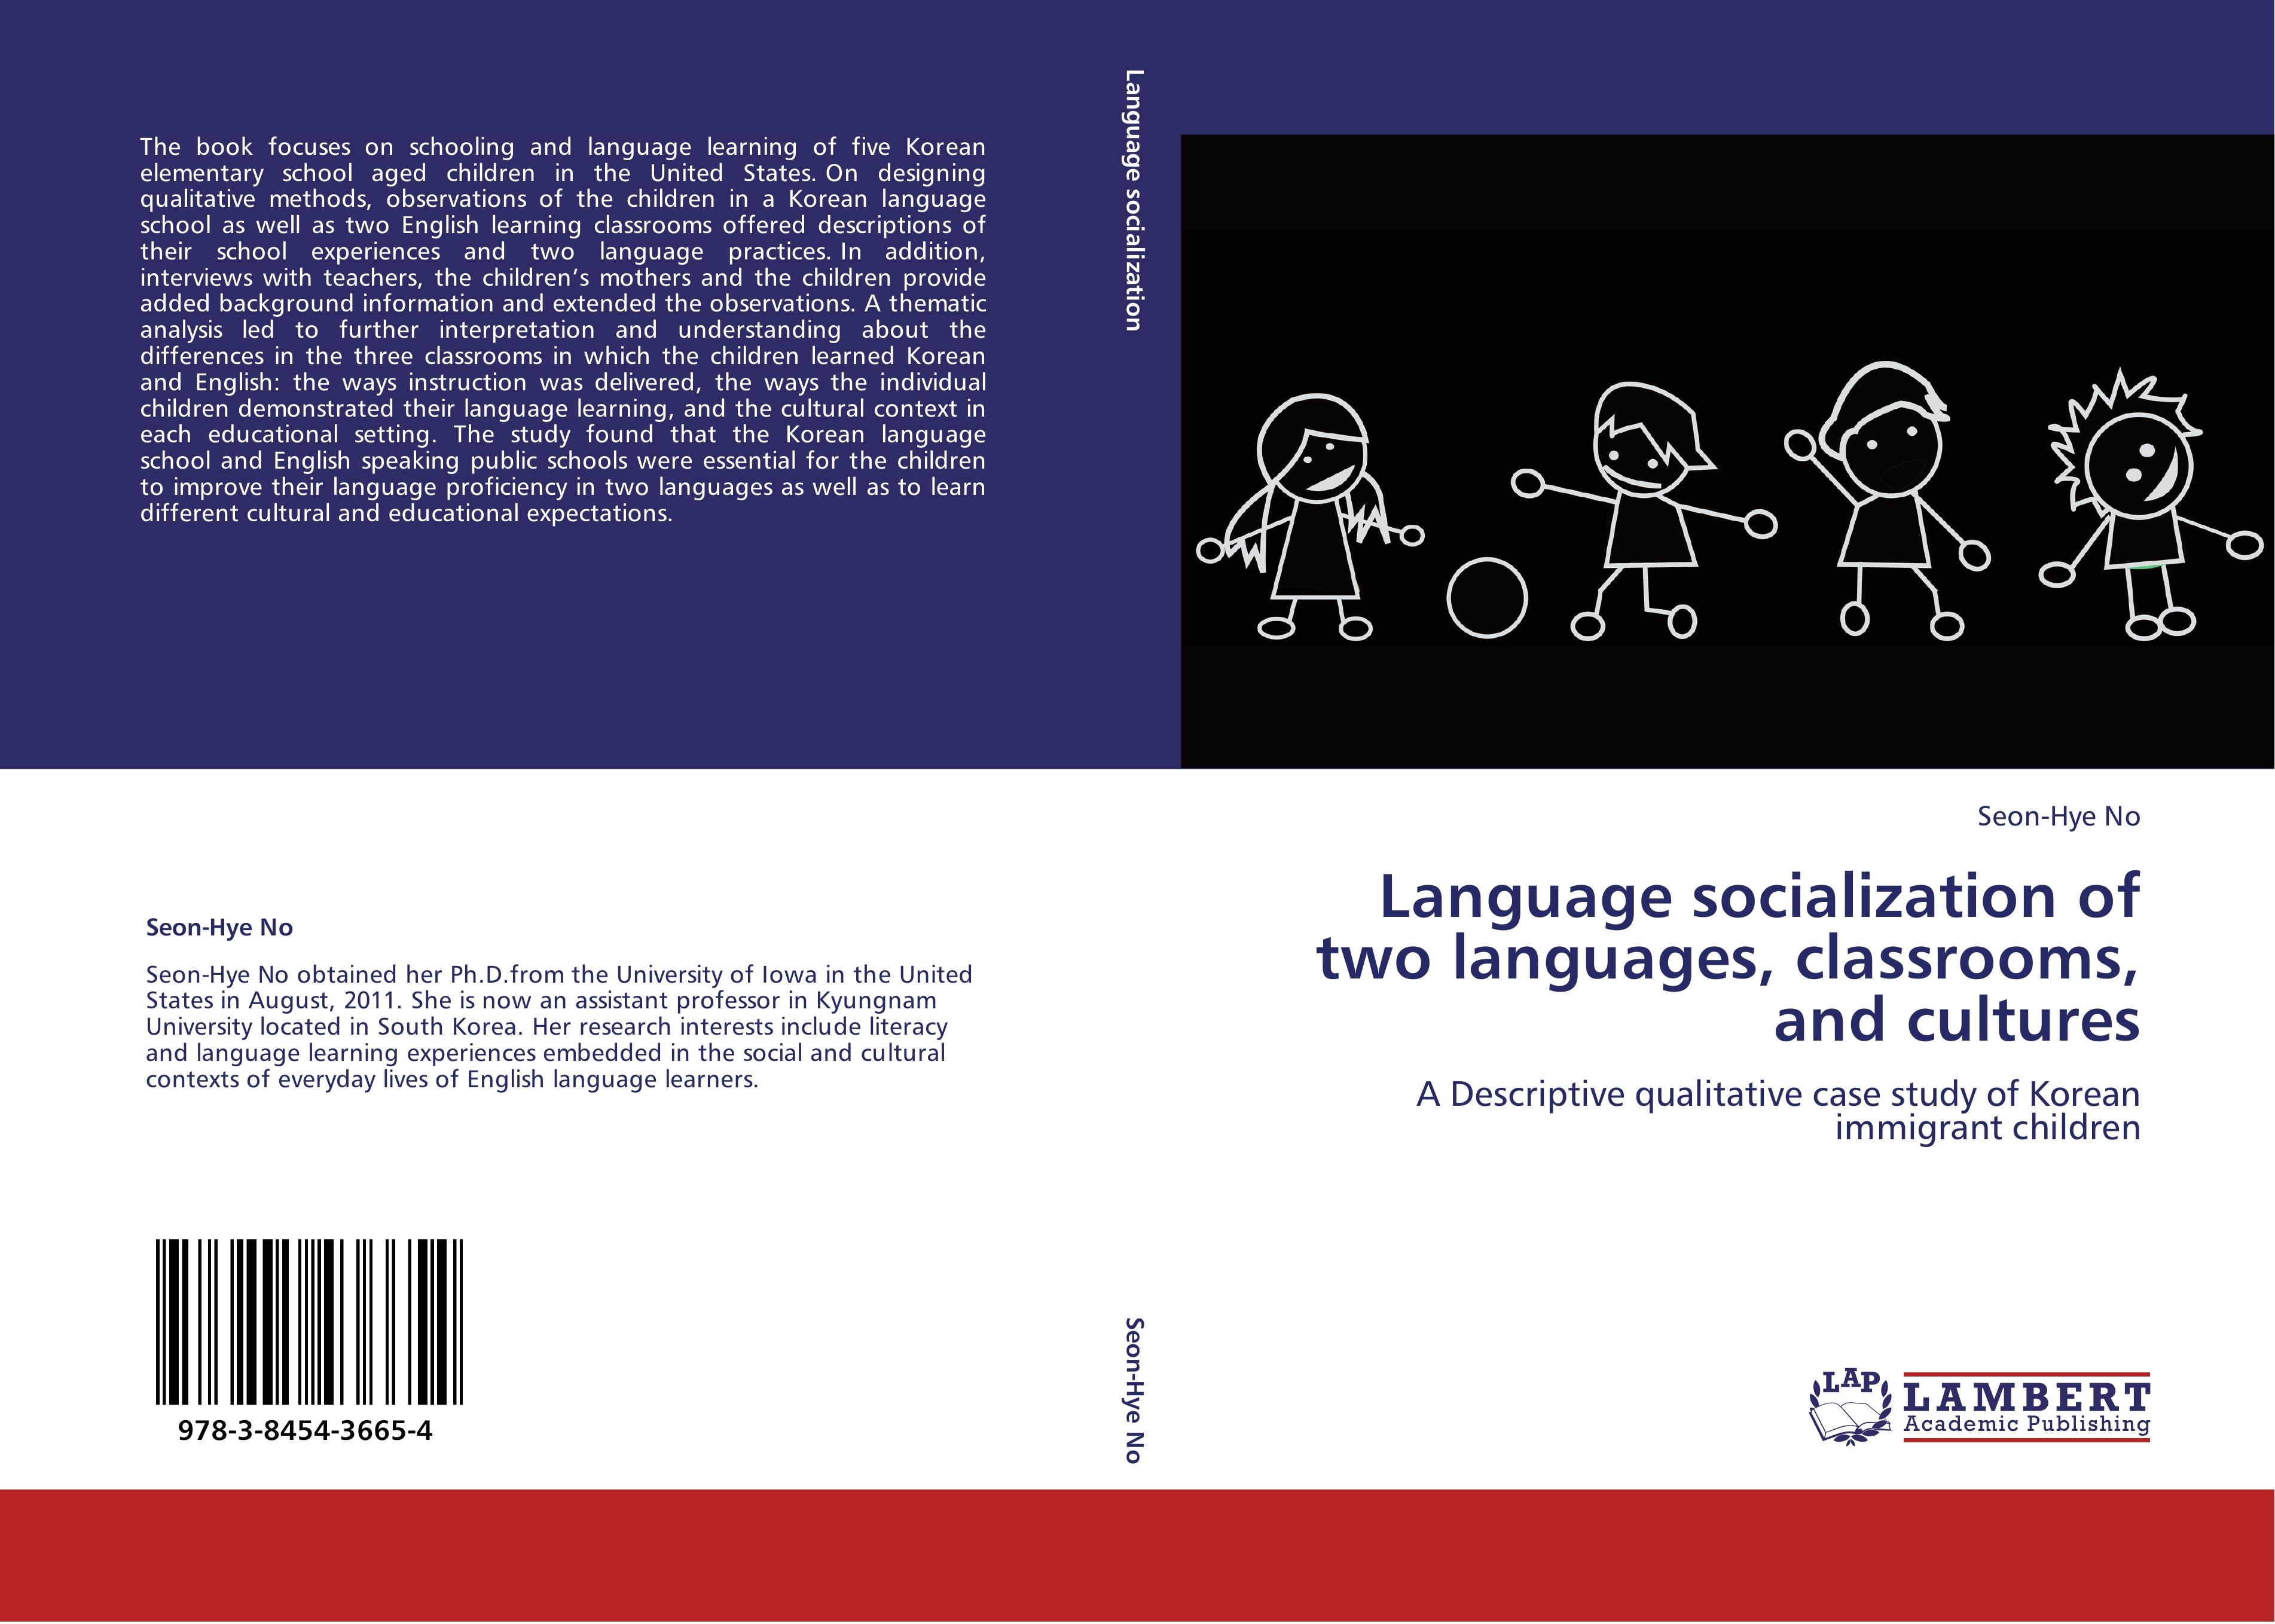 Language socialization of two languages, classrooms, and cultures / A Descriptive qualitative case study of Korean immigrant children / Seon-Hye No / Taschenbuch / Paperback / 204 S. / Englisch / 2012 - No, Seon-Hye